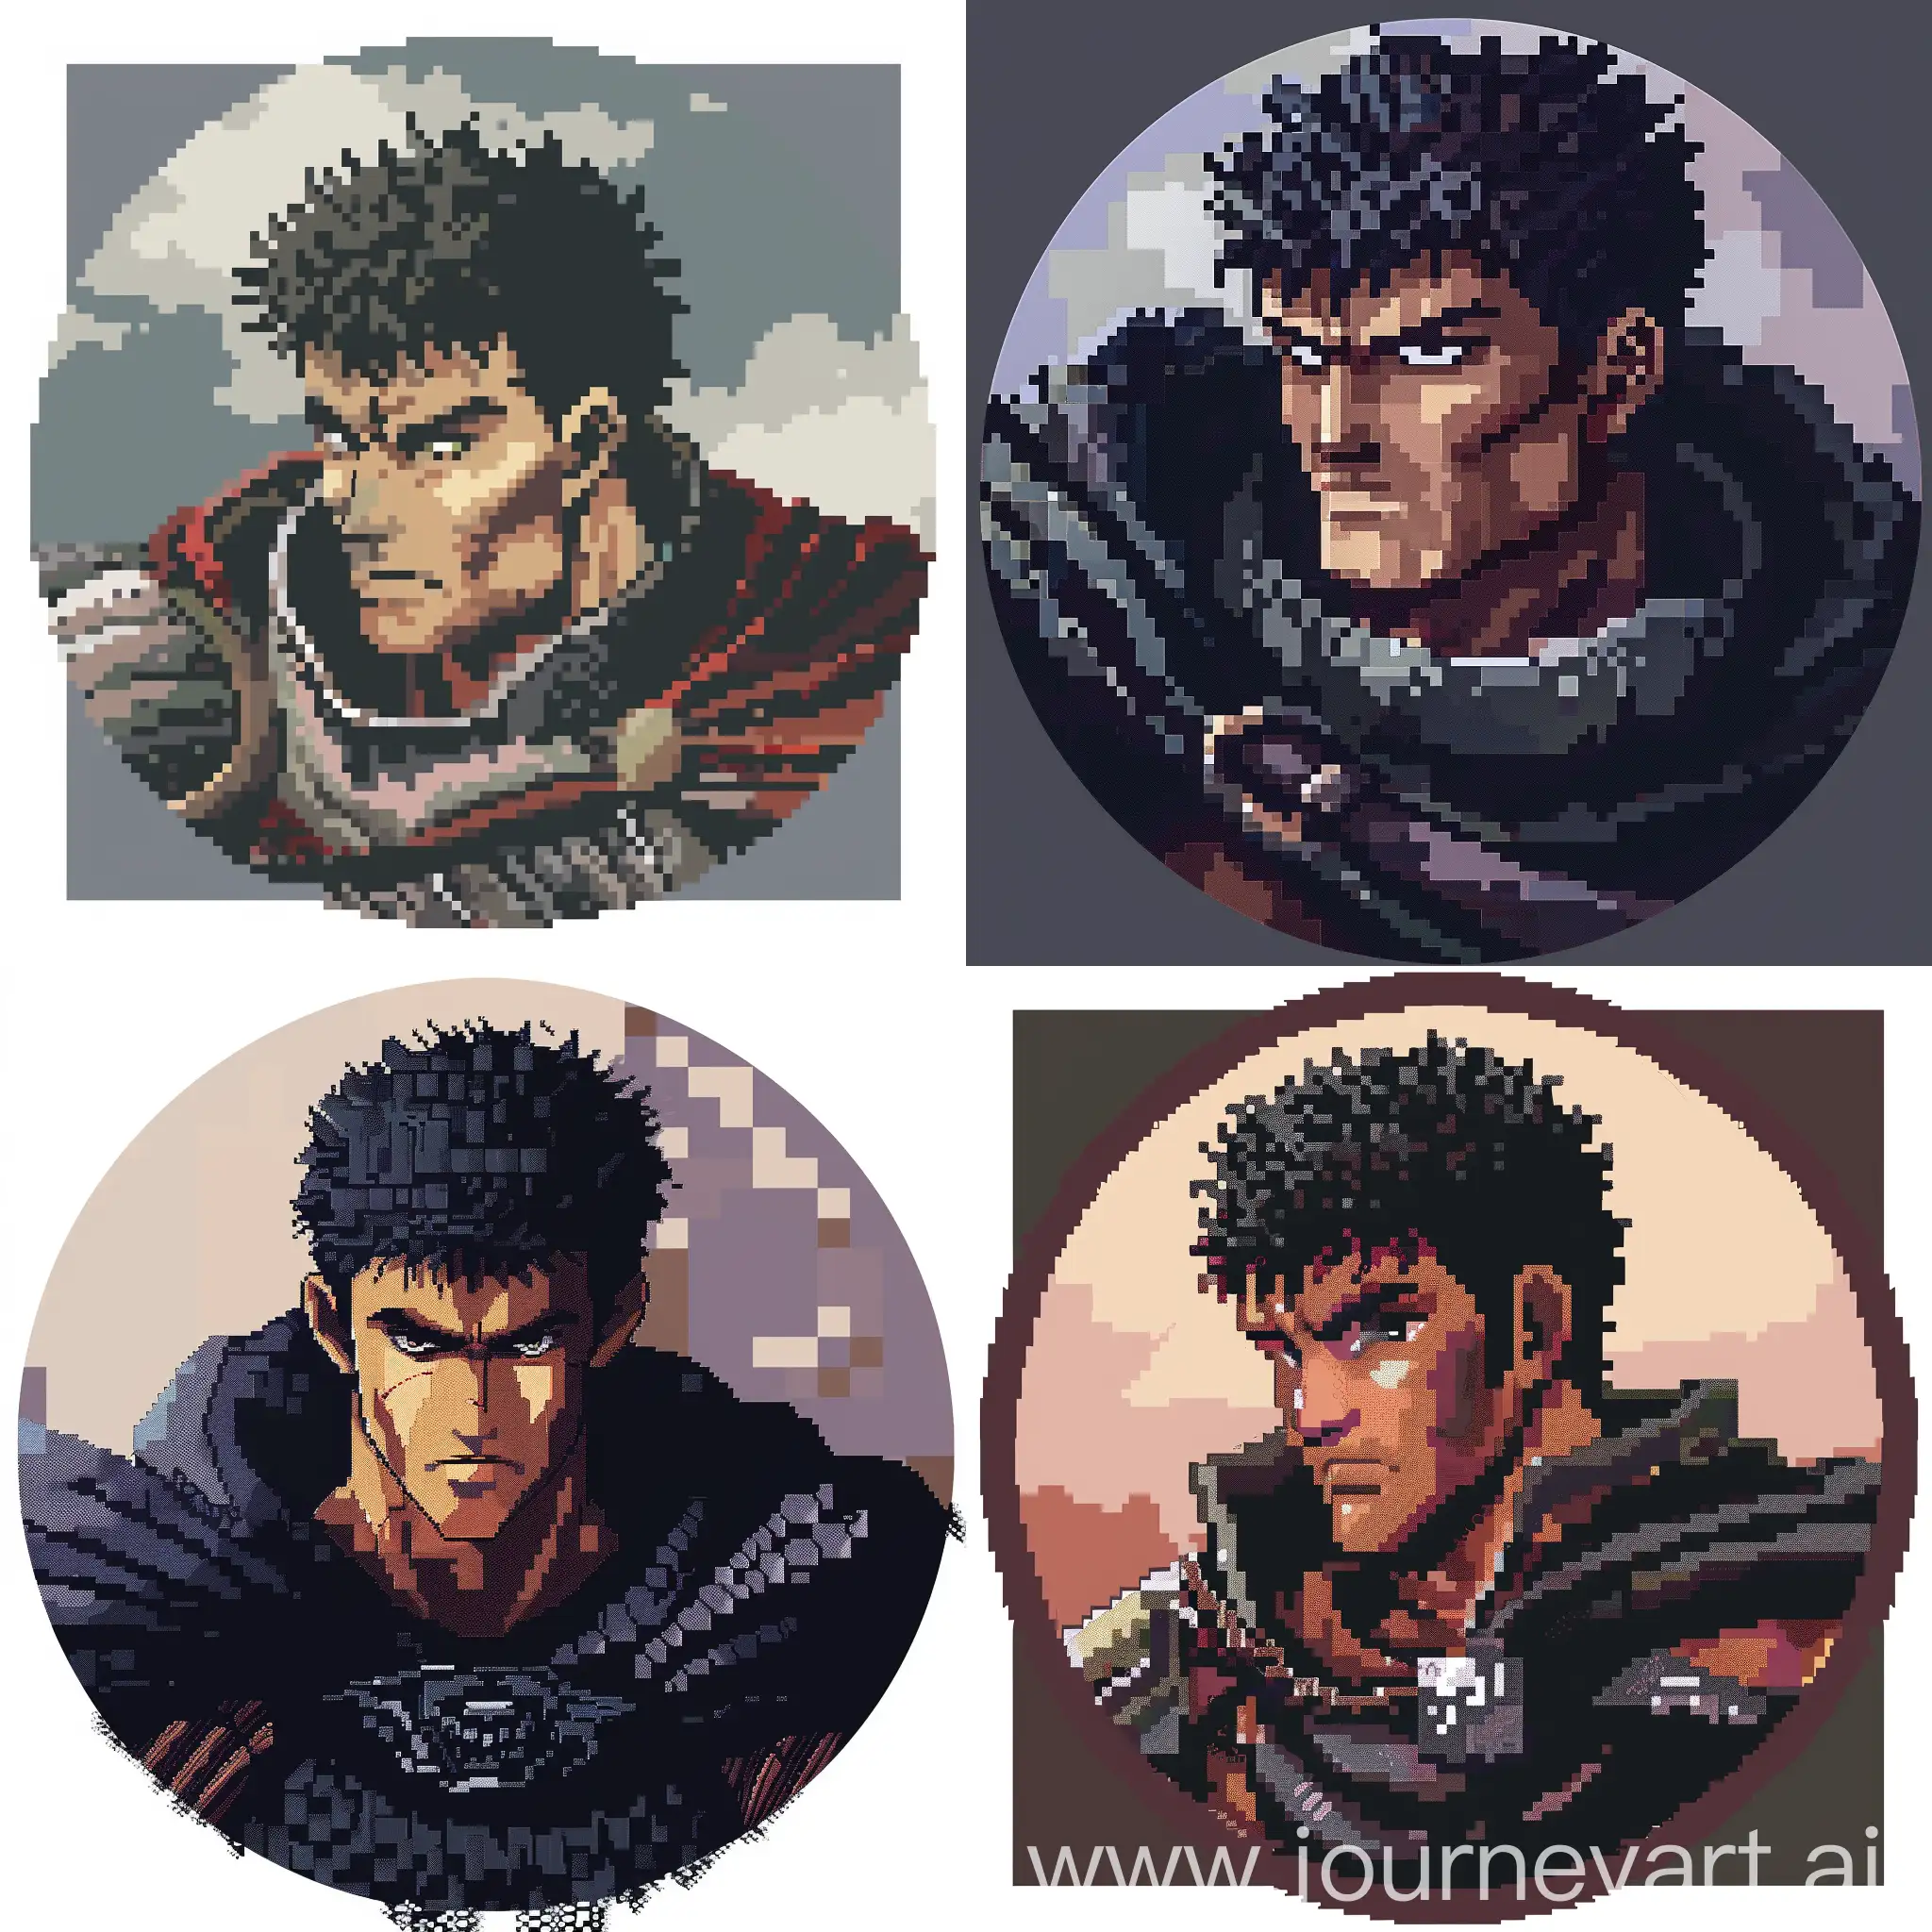 Pixelated-Guts-Logo-for-YouTube-Twitch-and-TikTok-Channels